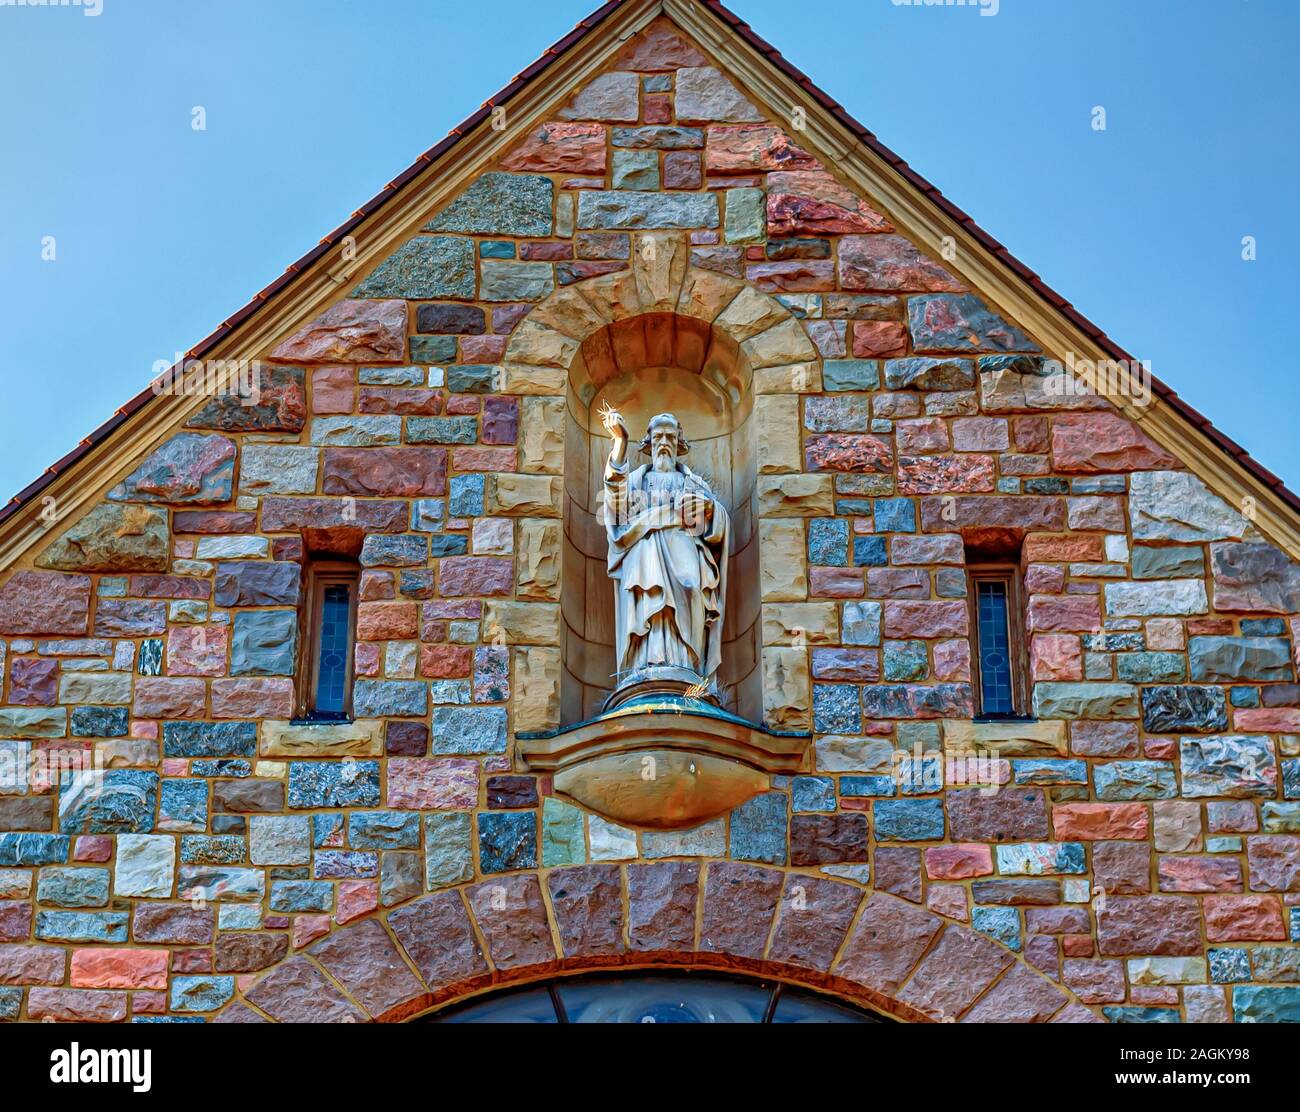 A statue of St. Thomas the Apostle overlooking the entrance of the catholic church at 530 Elizabeth Street Ann Arbor, Michigan. Stock Photo